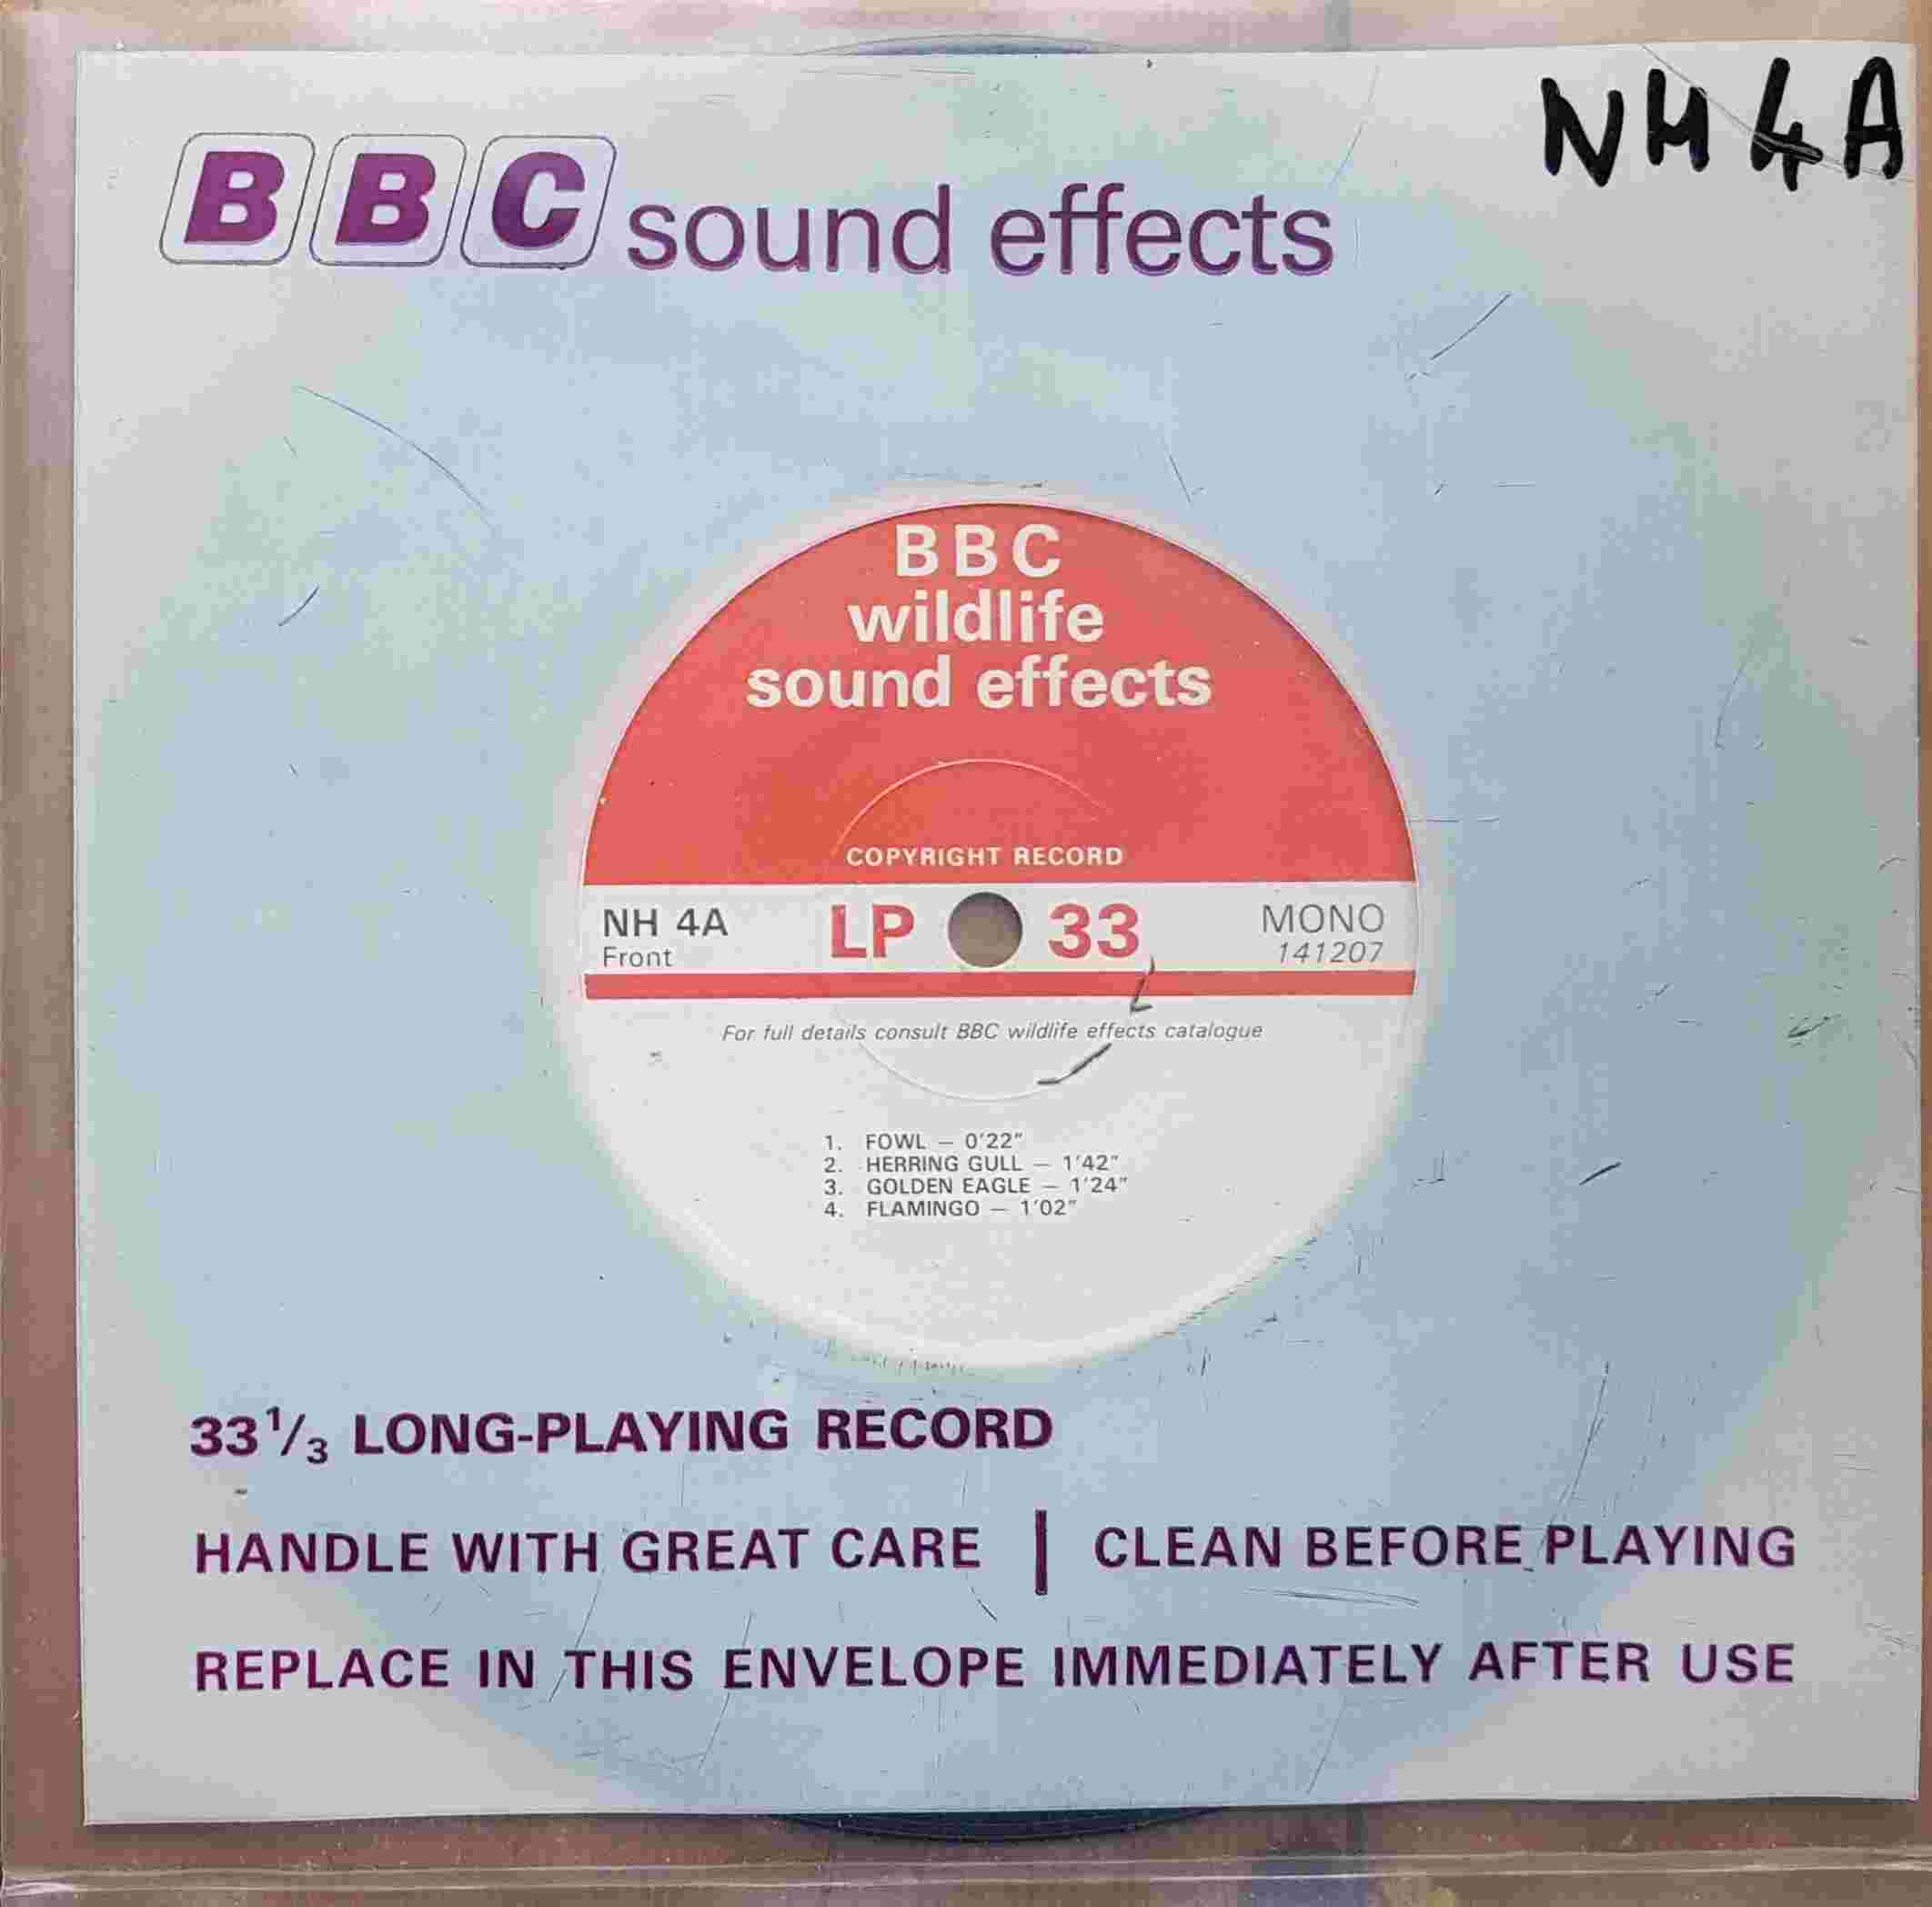 Picture of NH 4A Birds by artist Not registered from the BBC singles - Records and Tapes library